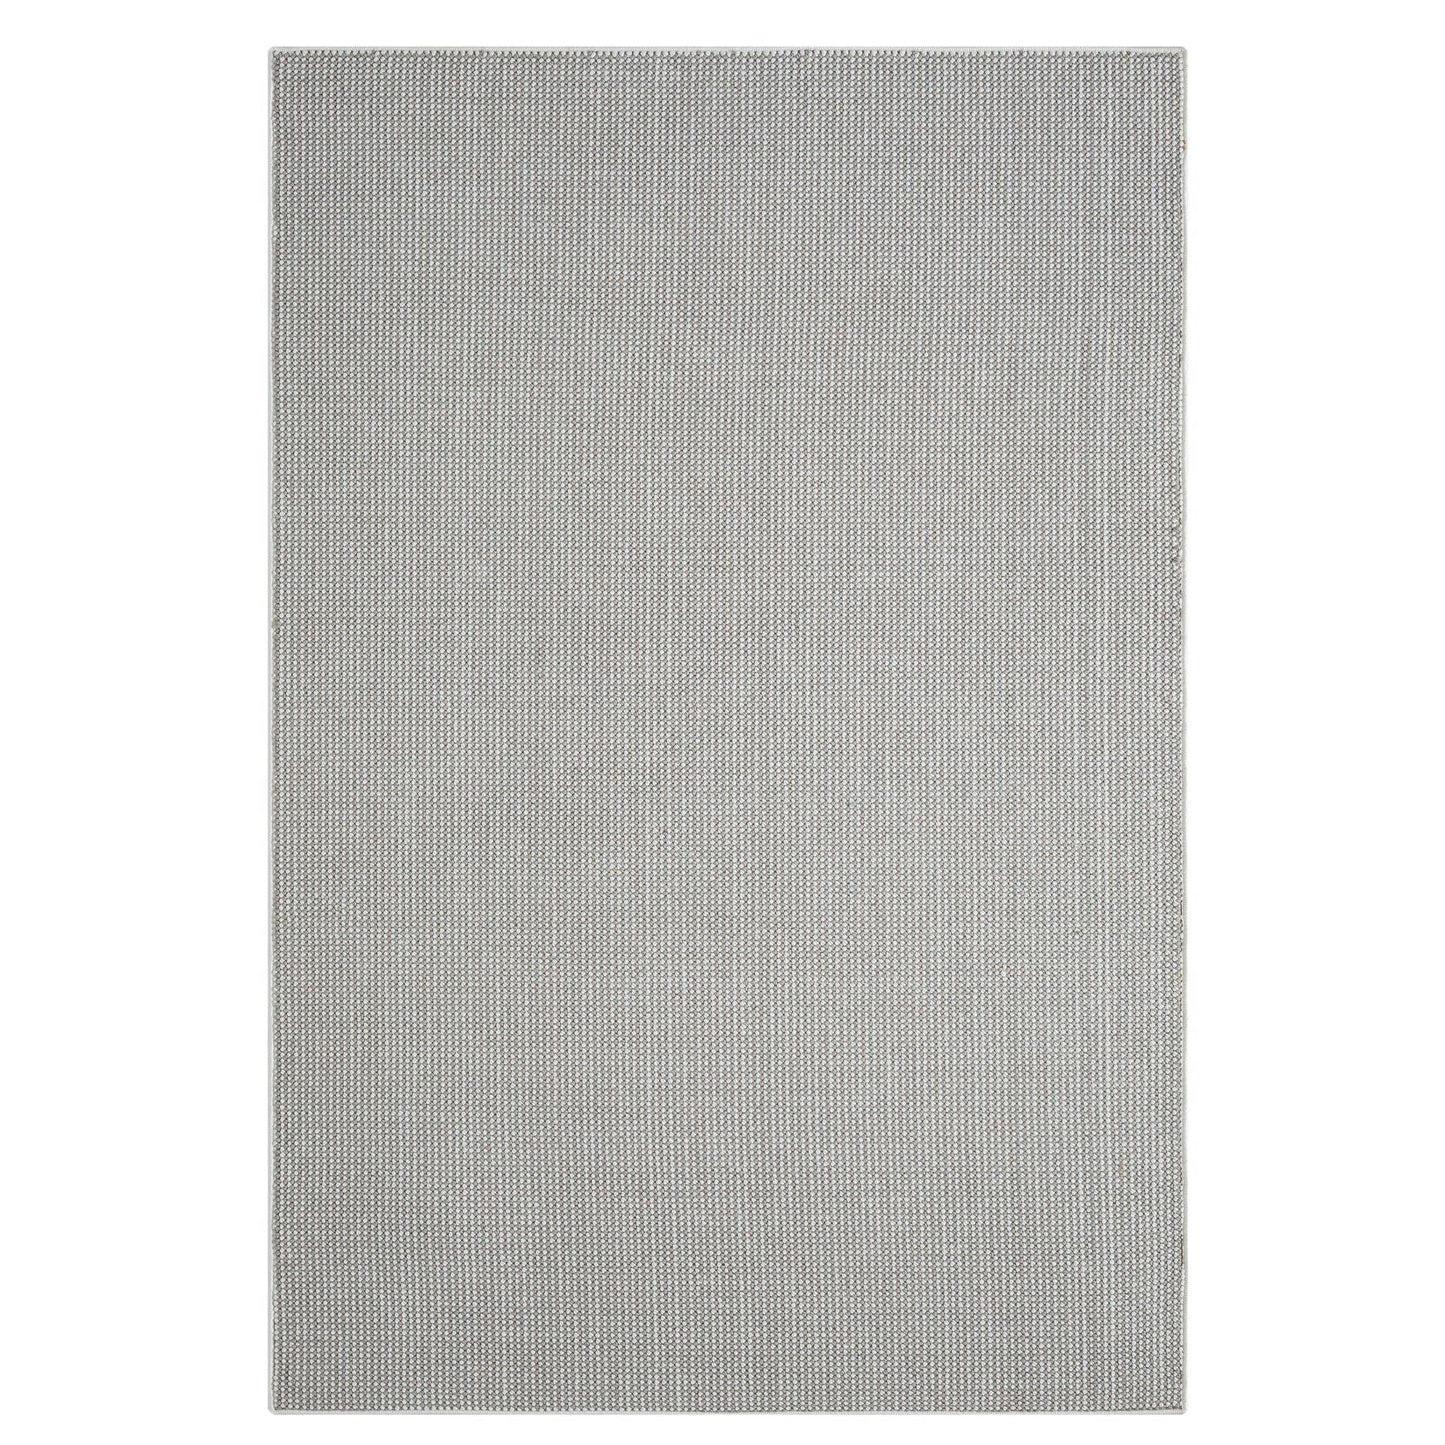 Solace 195 Cloud Saray Rugs